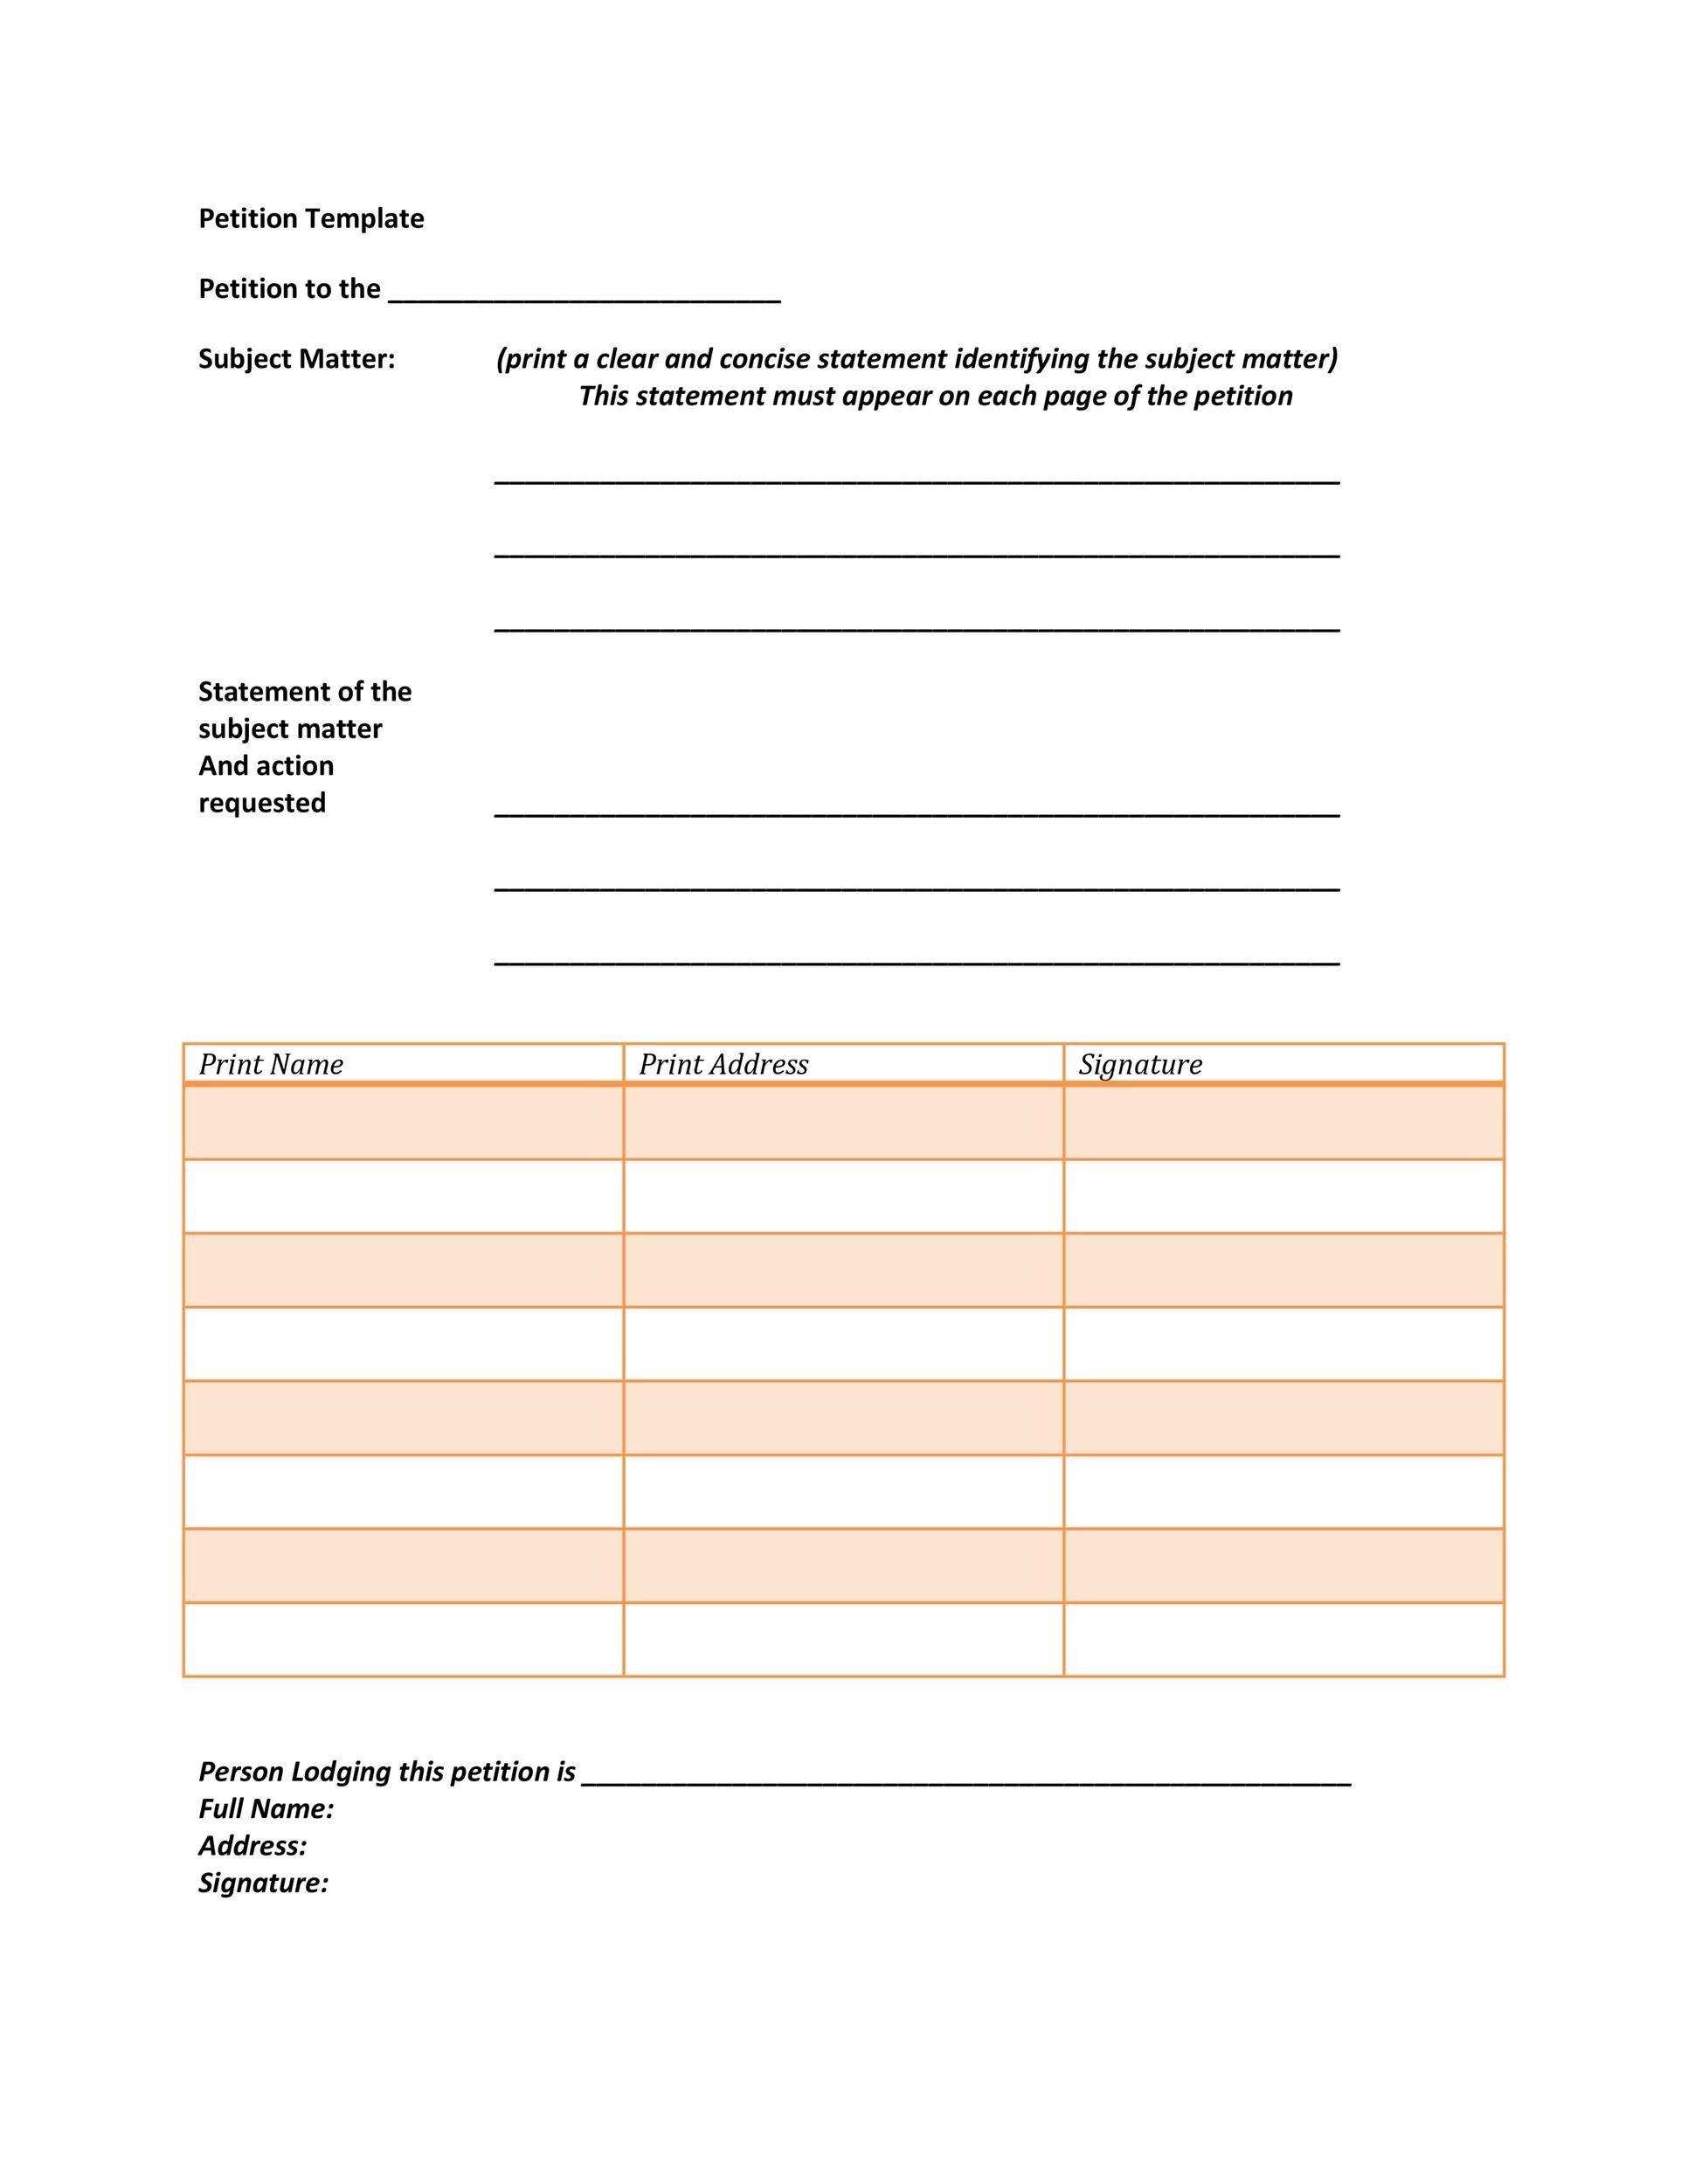 Free Petition template 08